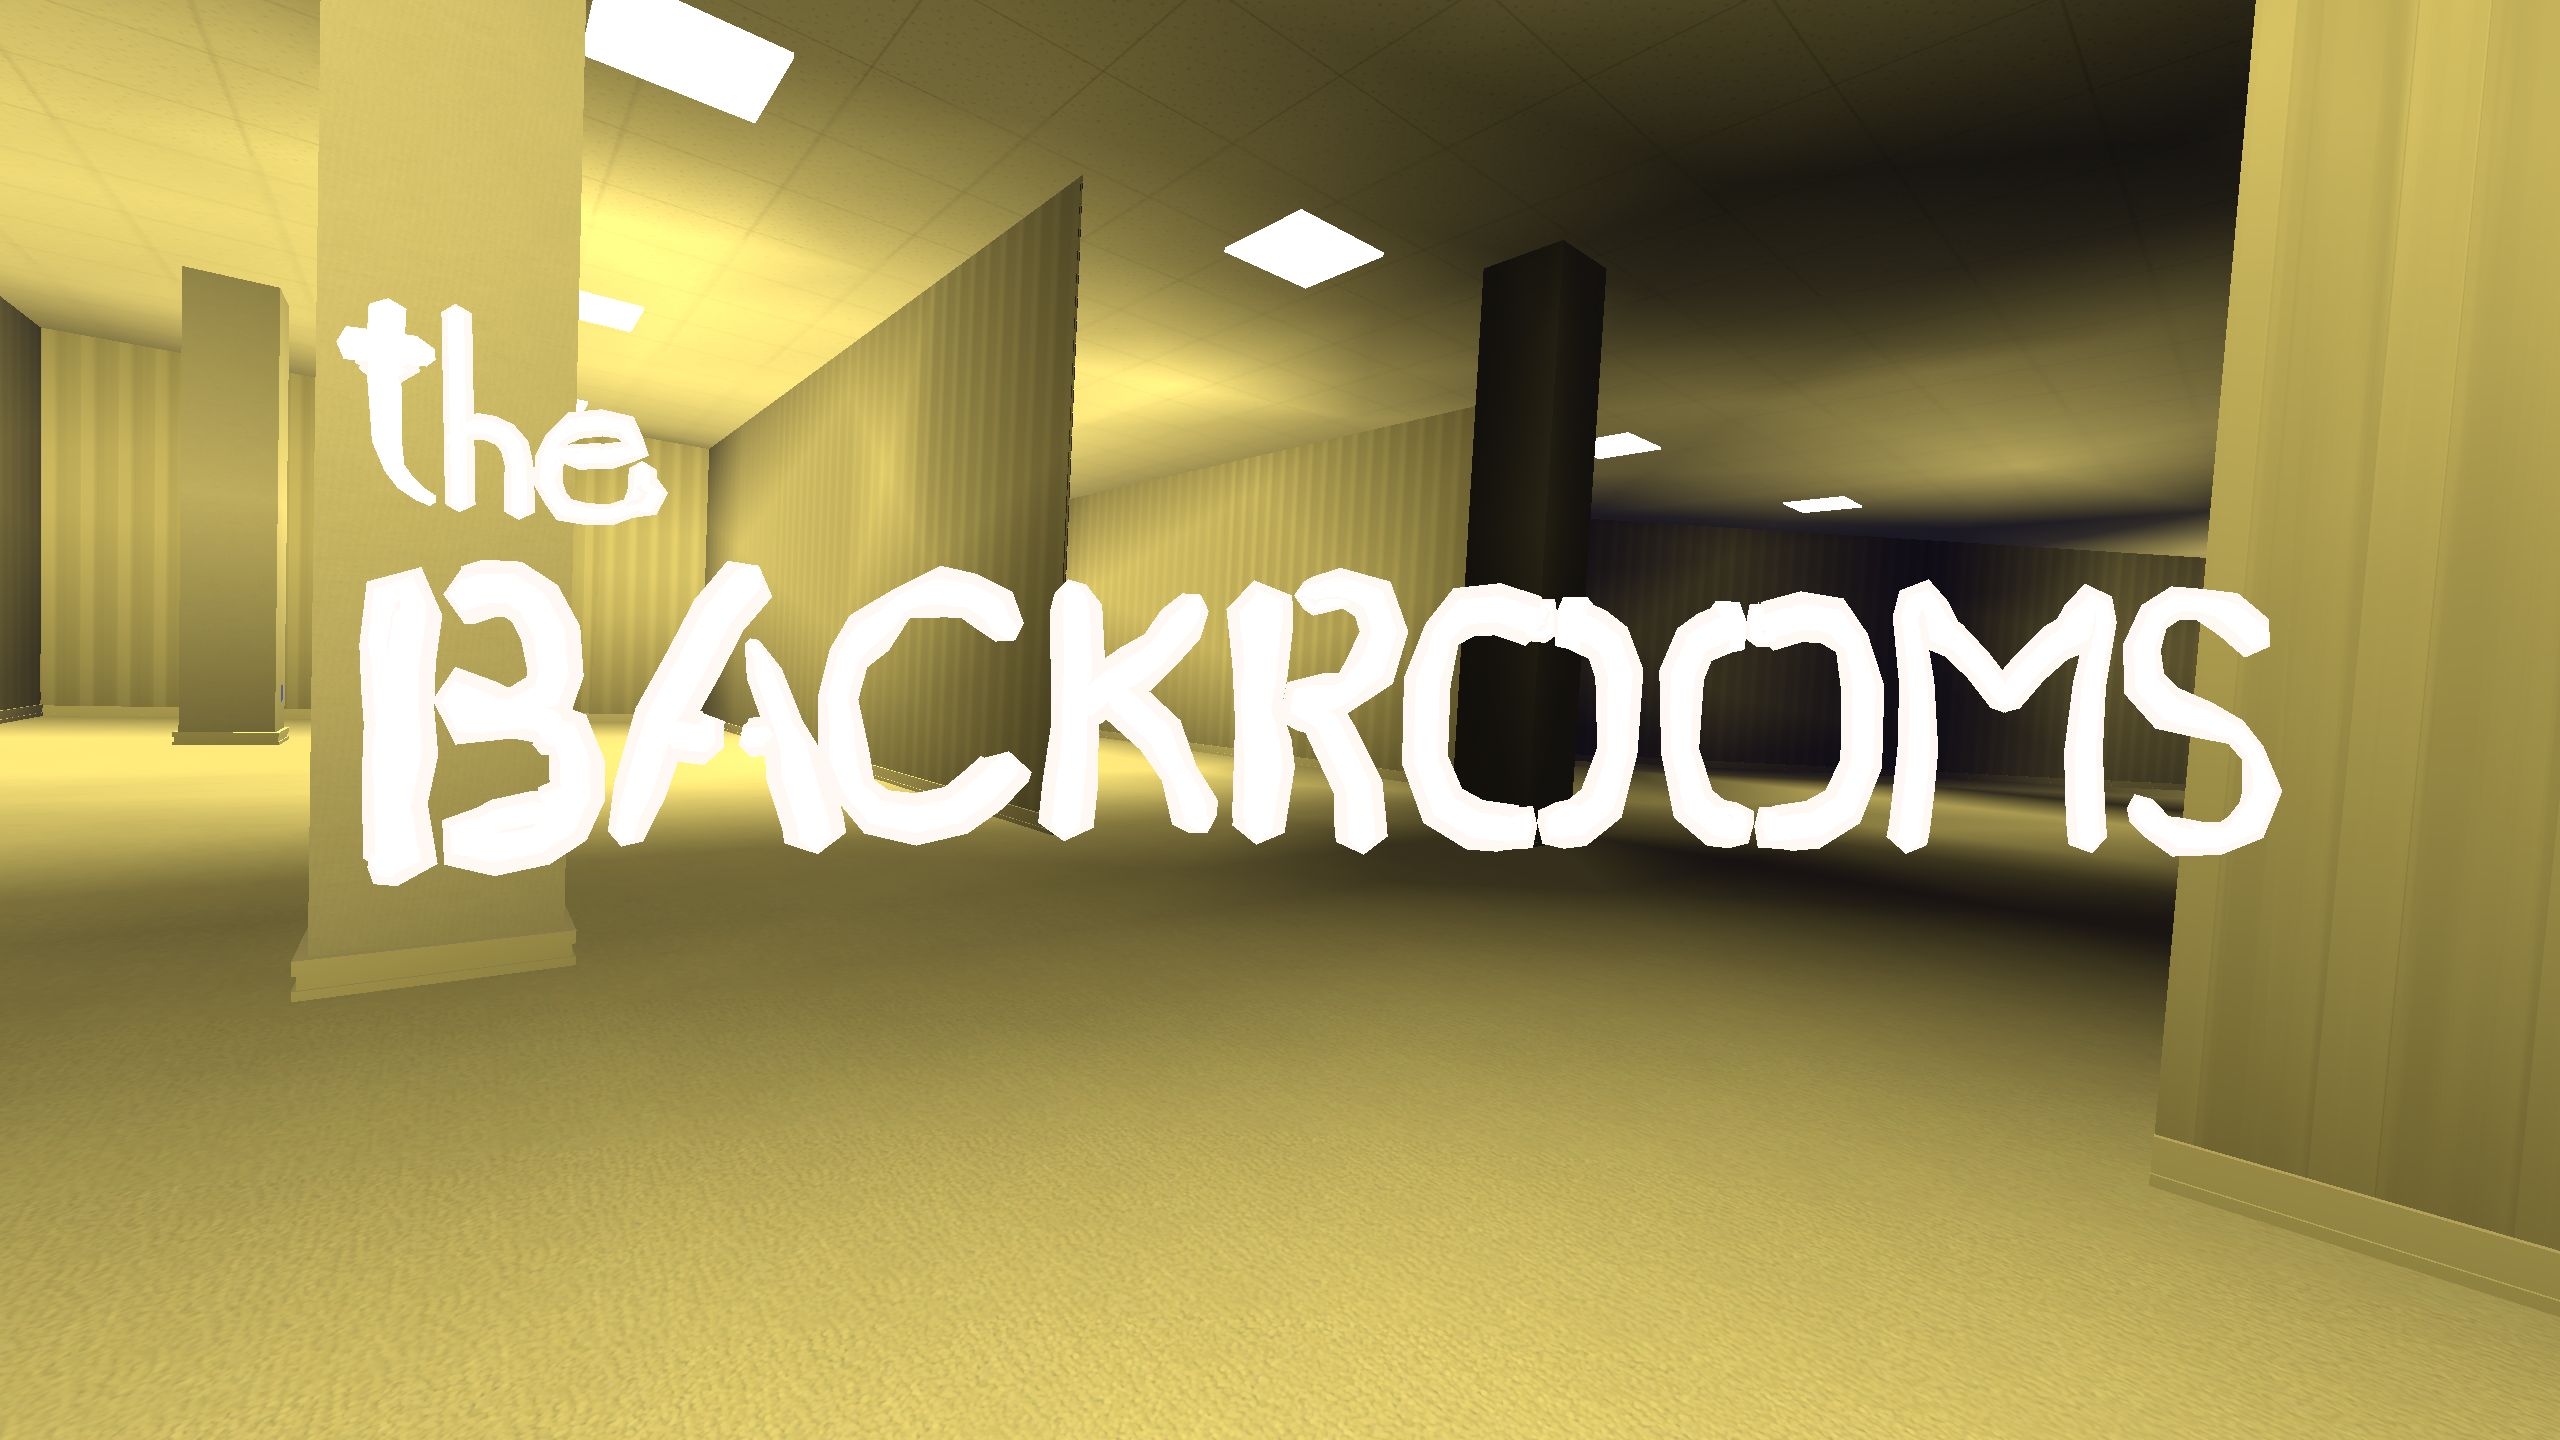 The Backrooms [REMASTERED] - Roblox